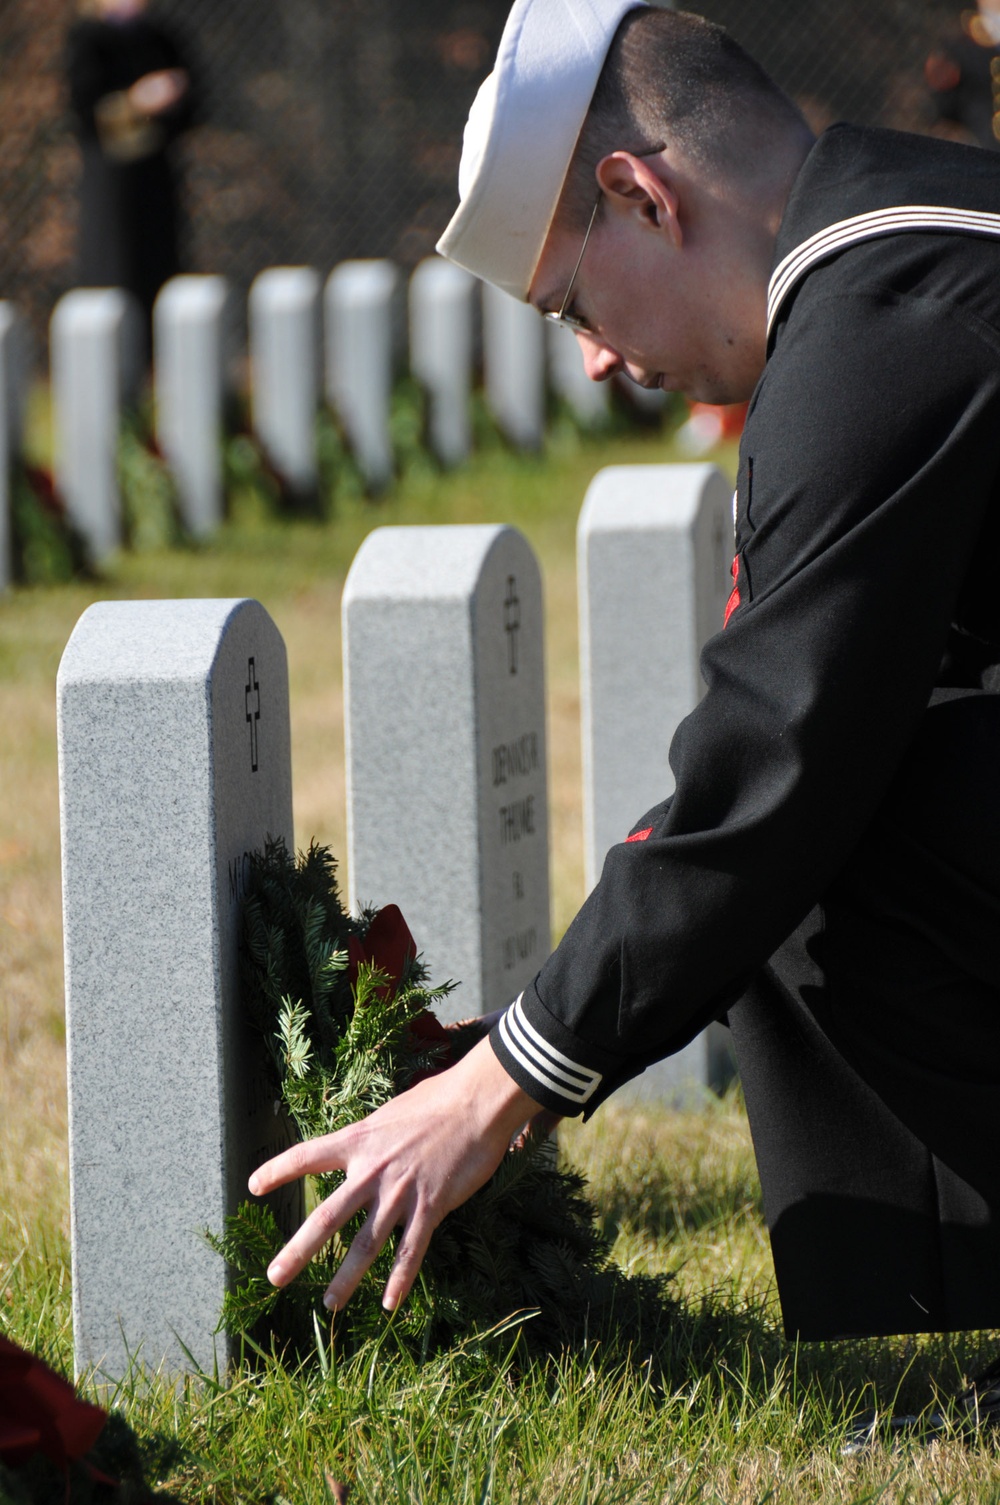 A 2nd class petty officer of the Navy lays a wreath on a fallen Veteran's tombstone during a Wreaths Across America Ceremony at the Alfred G. Horton, Jr. Memorial Veterans Cemetery. Wreaths Across America's mission is to remember the fallen, honor those w